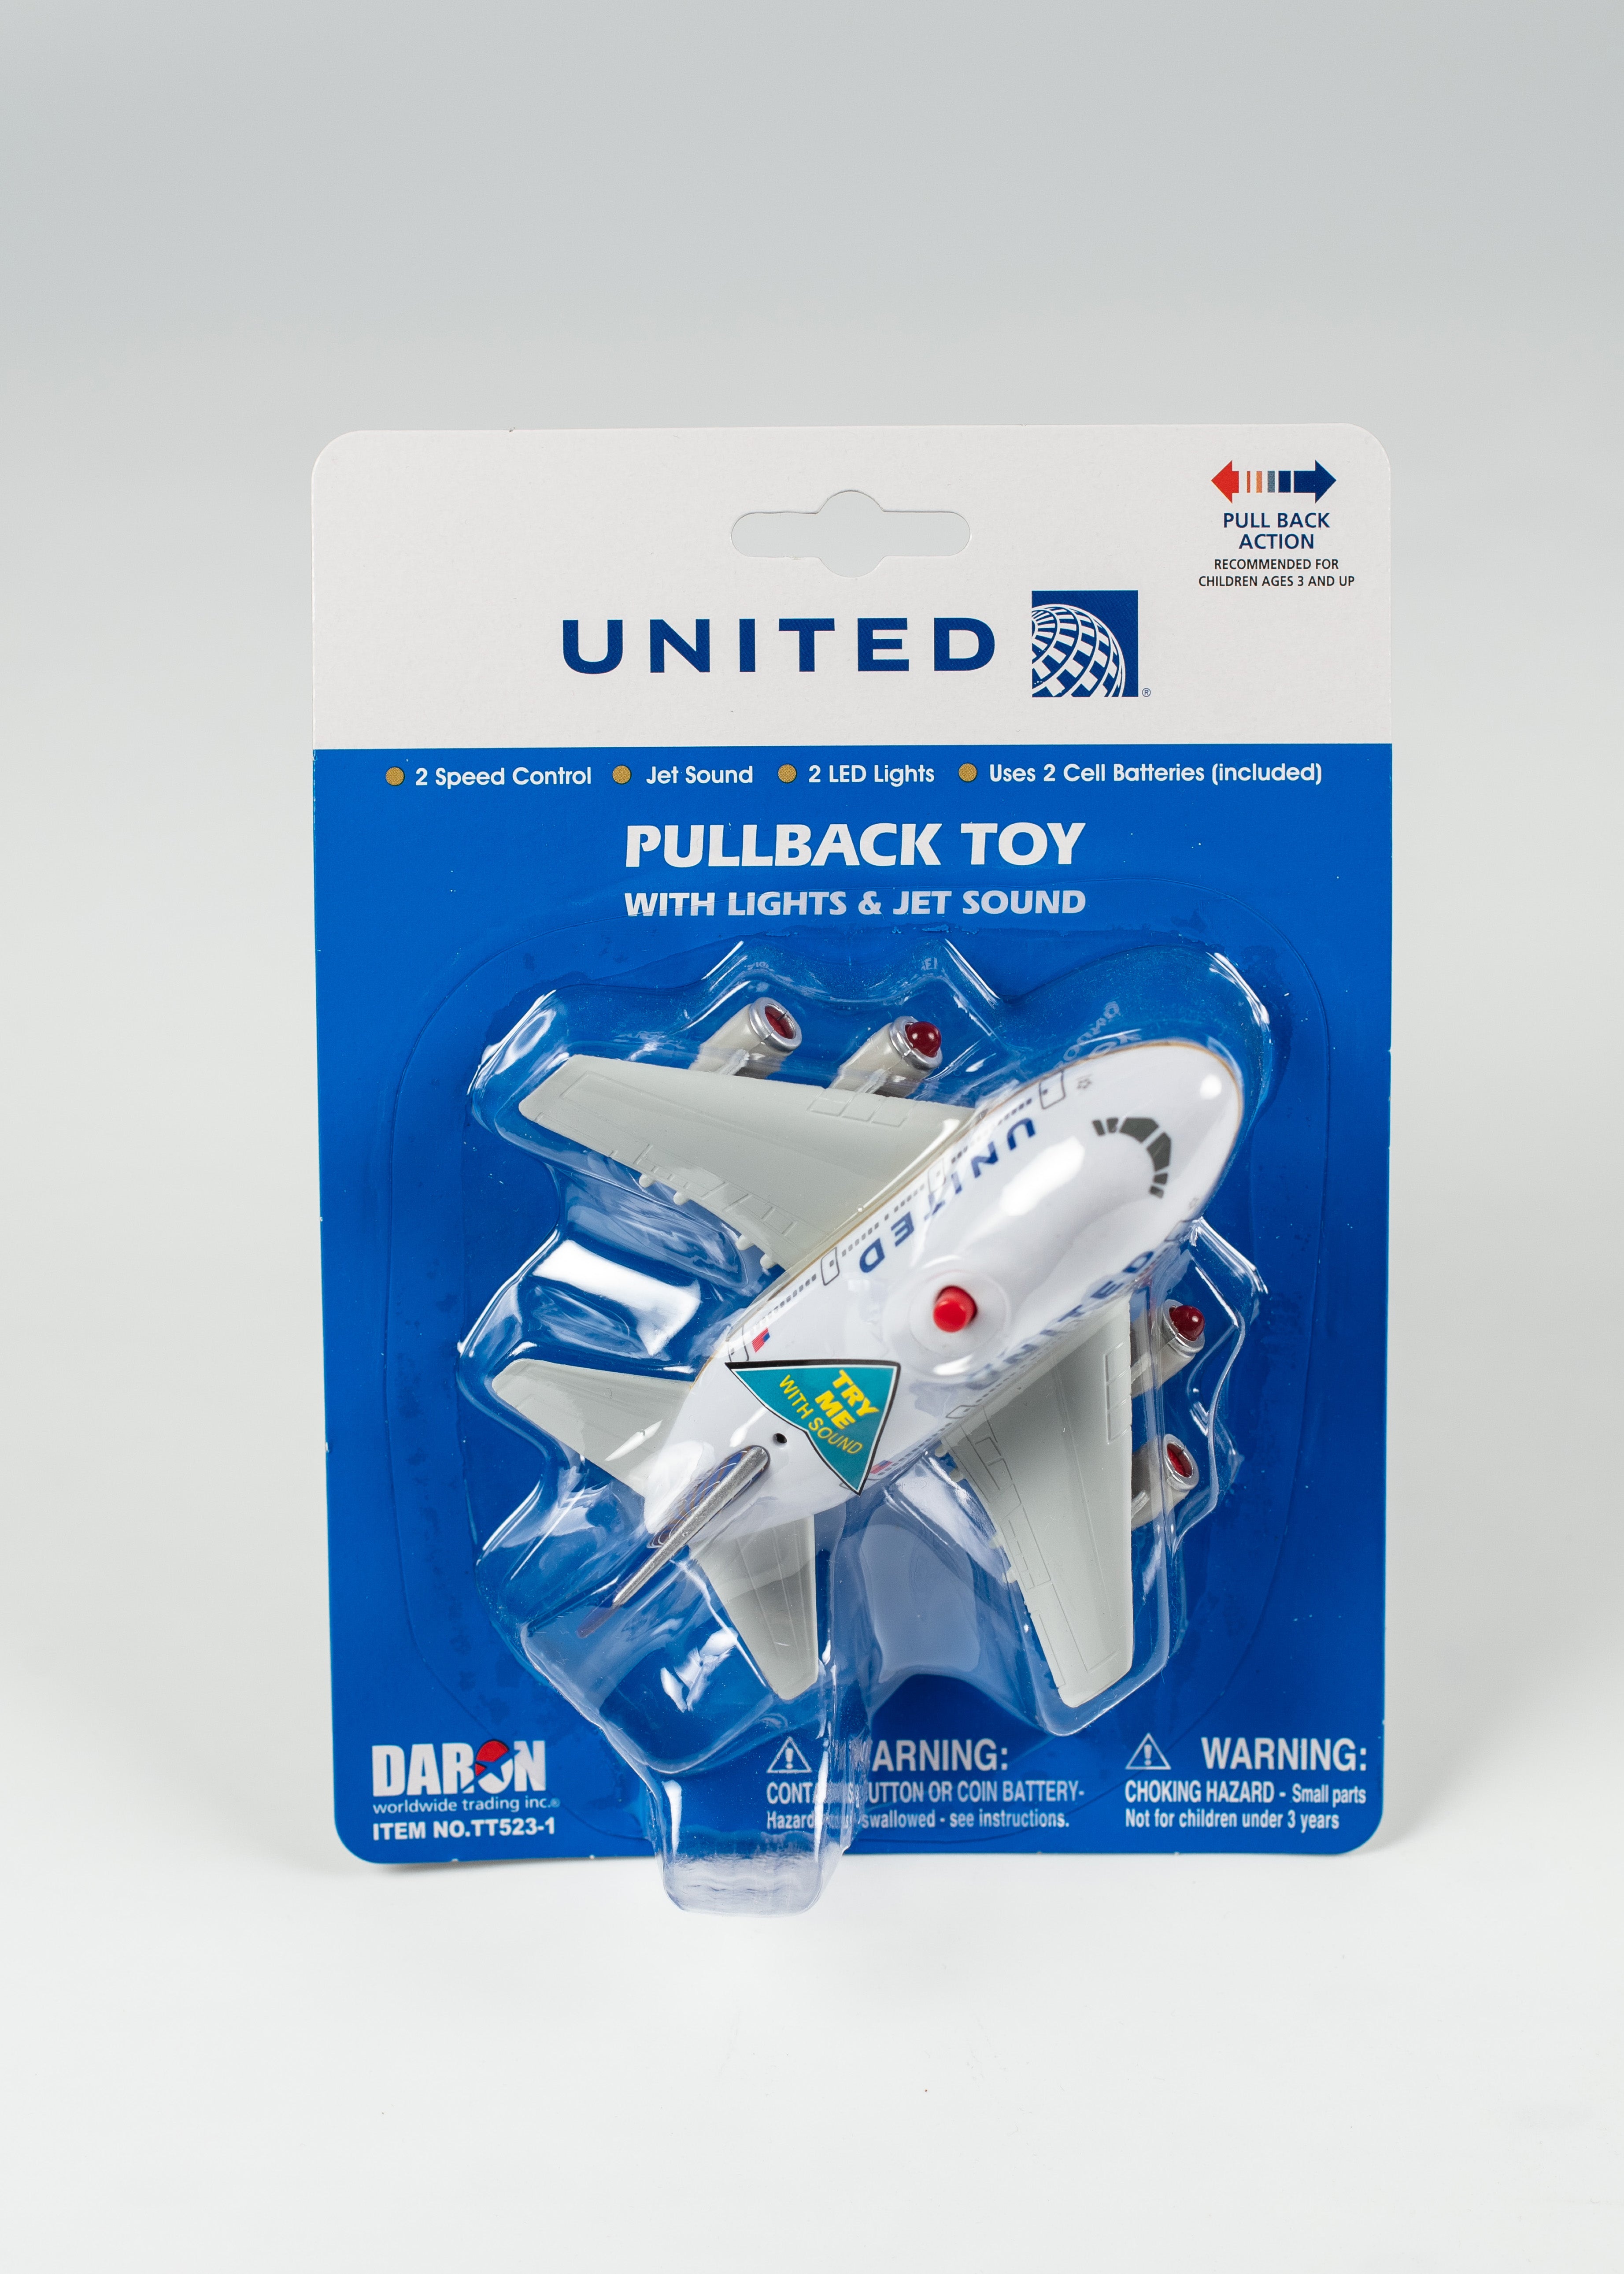 UNITED PULLBACK PLANE FOR AGES 3 AND UP BATTERIES INCLUDED